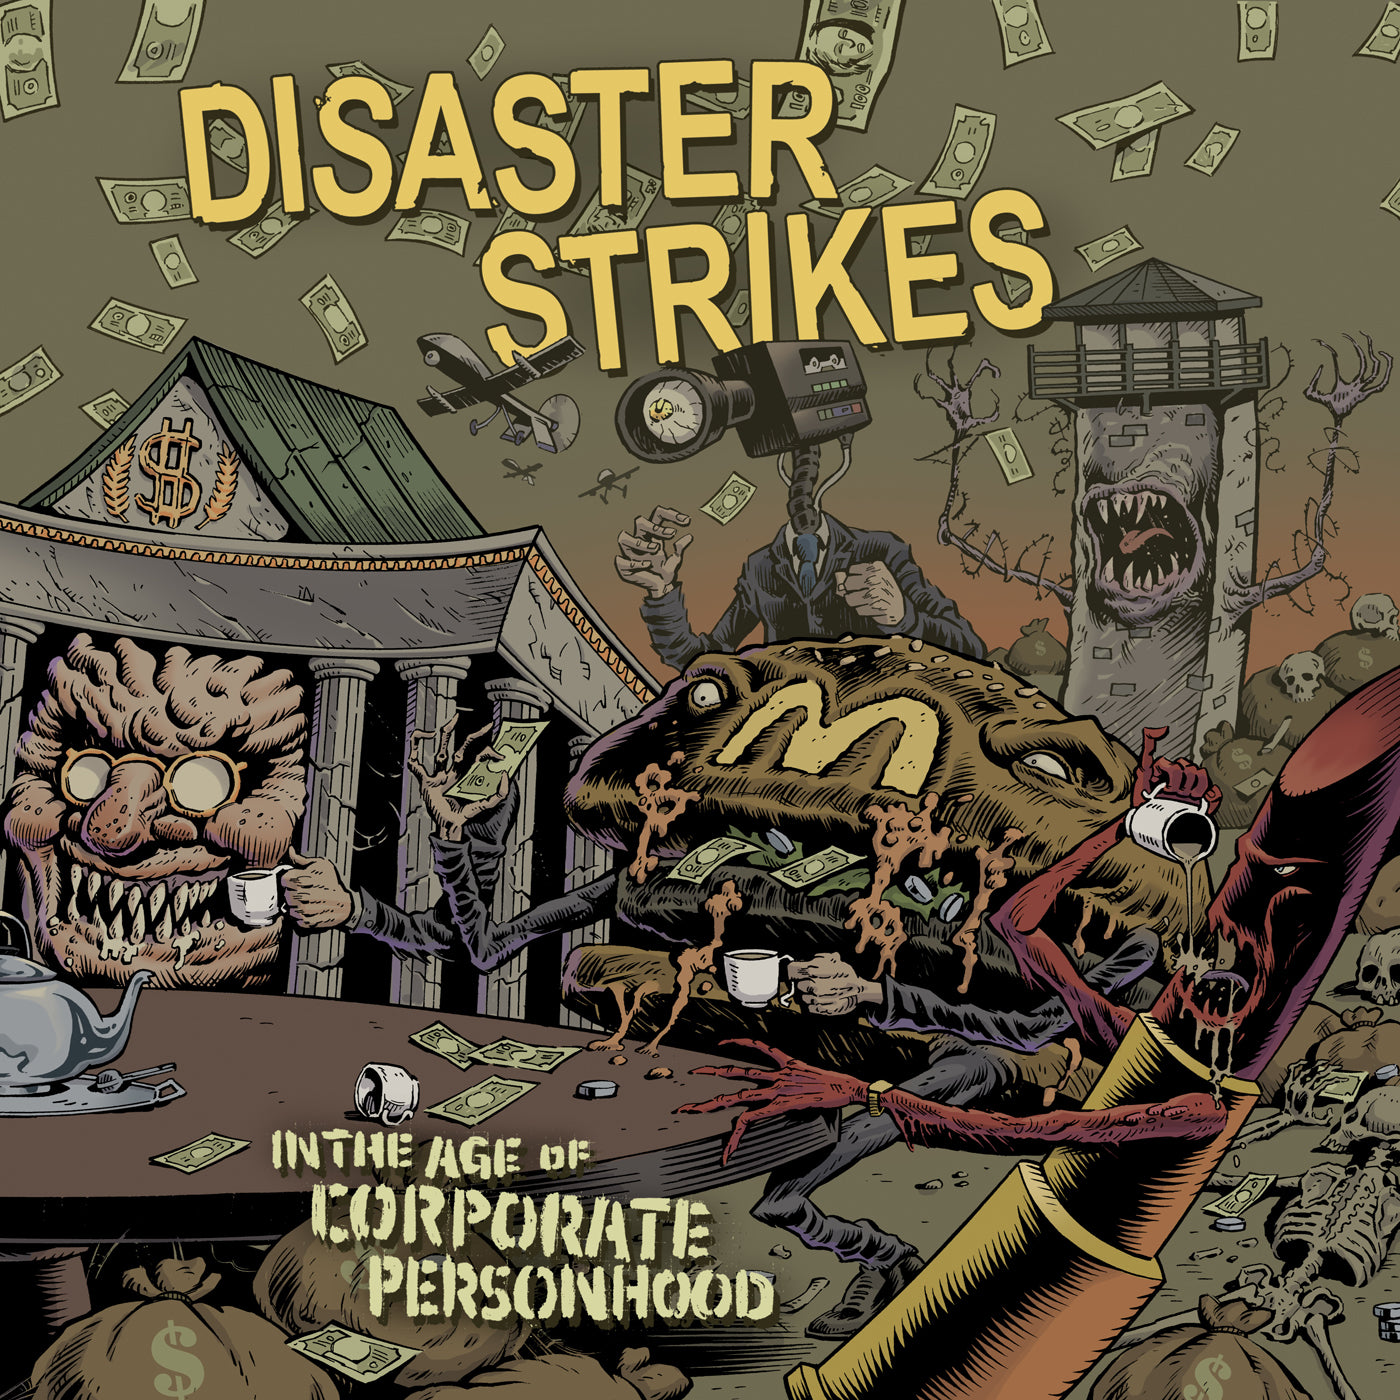 v485 - Disaster Strikes - "In The Age Of Corporate Personhood"